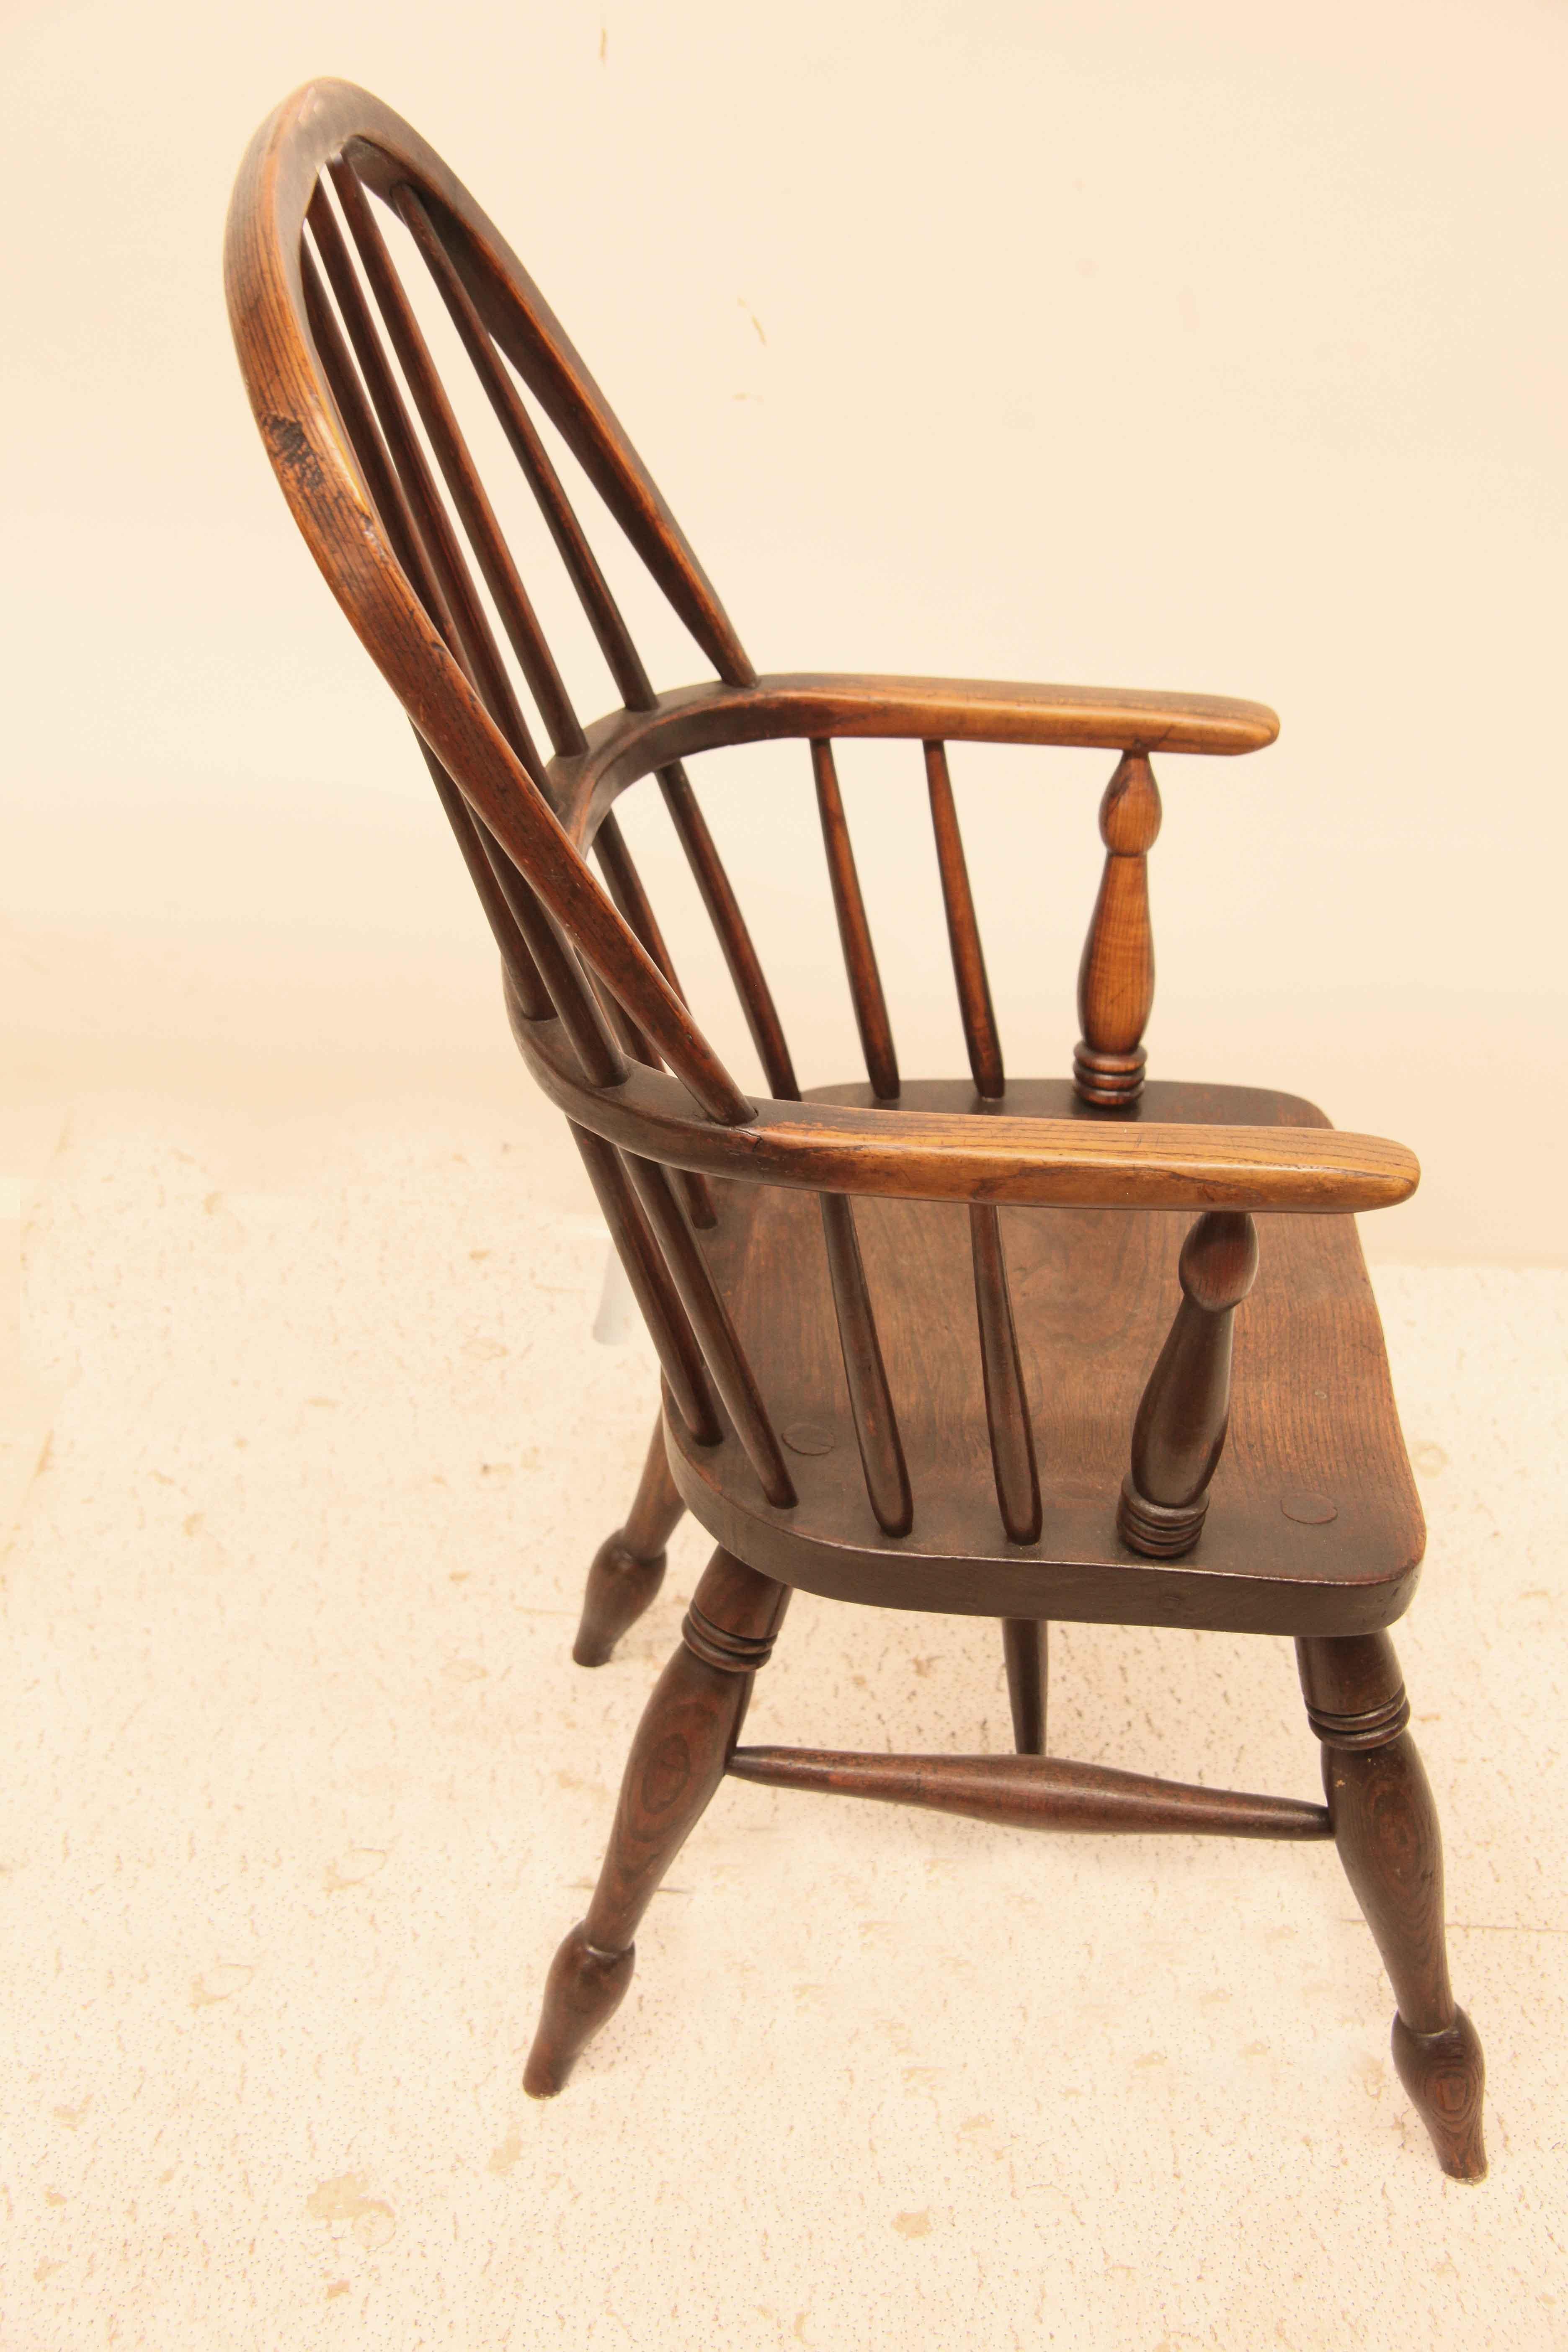 English Windsor youth chair, this spindle back chair is entirely made from English elm. The straight arms have nice natural wear as well as the seat. The turned legs have connecting stretchers which will keep it sturdy for years to come. The back is